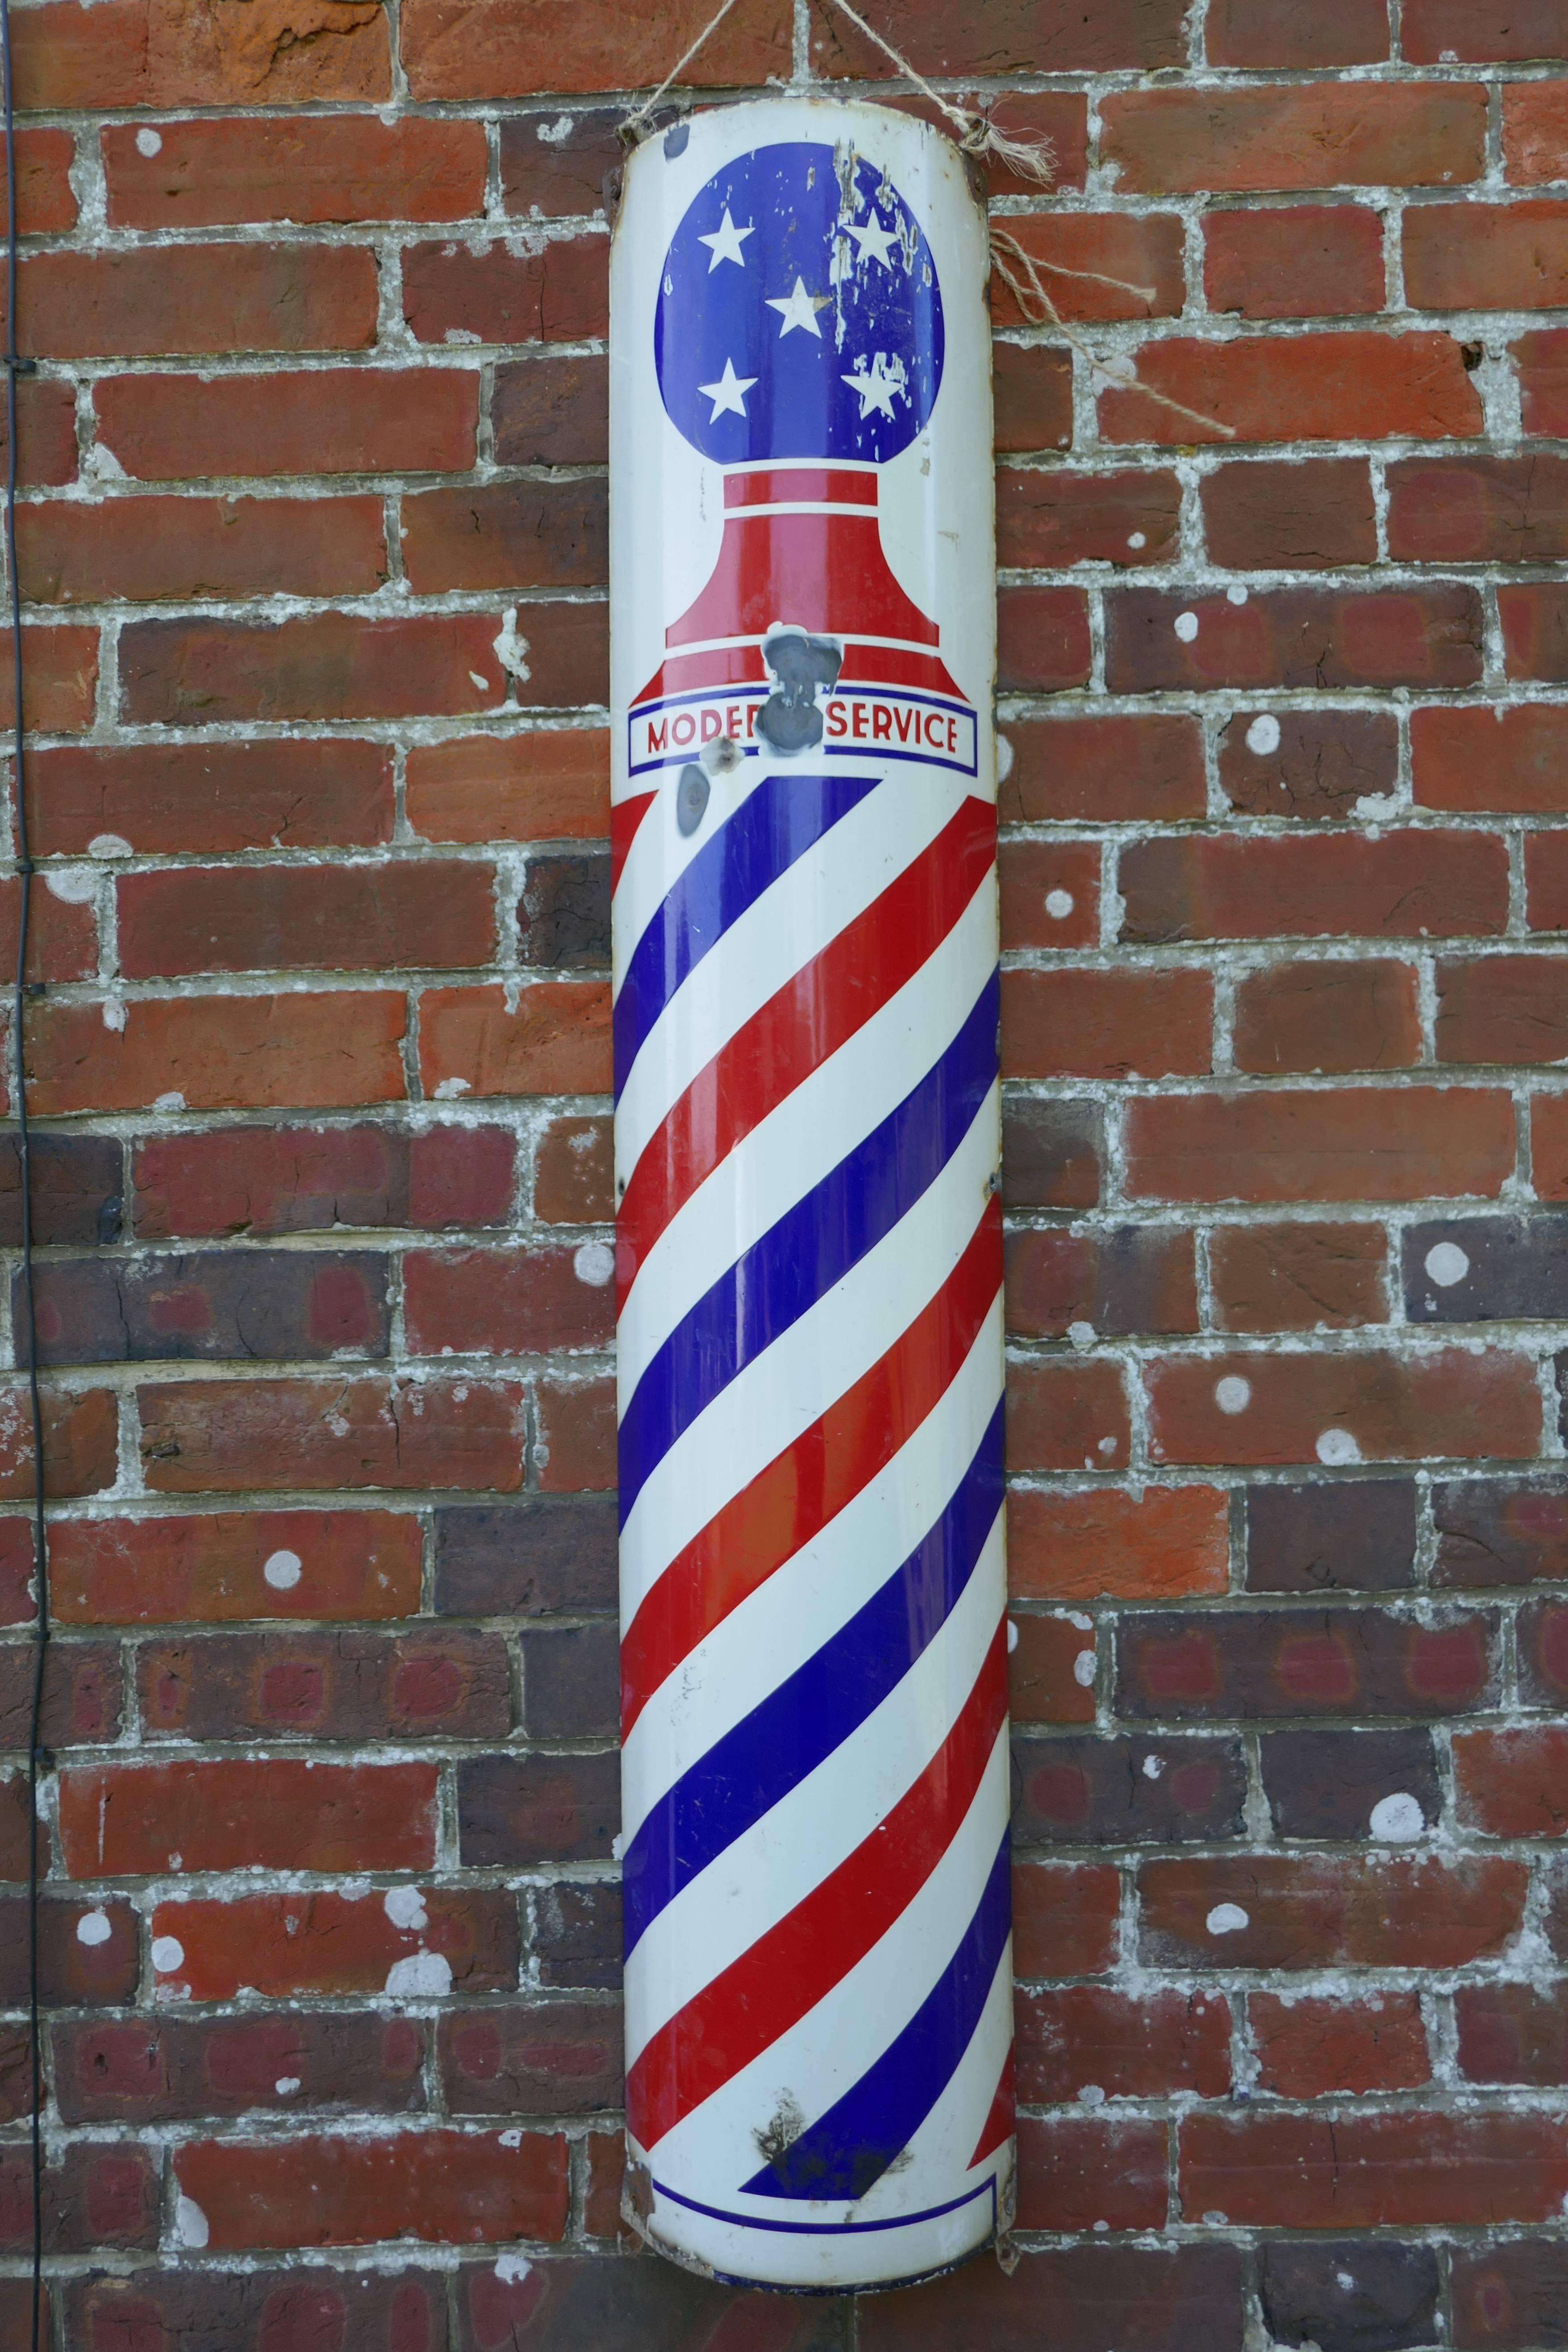 Rare porcelain enamel barbers pole shop sign.

This is a very rare old sign, it is American in origin, we have the red and blue stripes wrapped around a White background, and at the top white stars on a Blue background, the motif at the top says